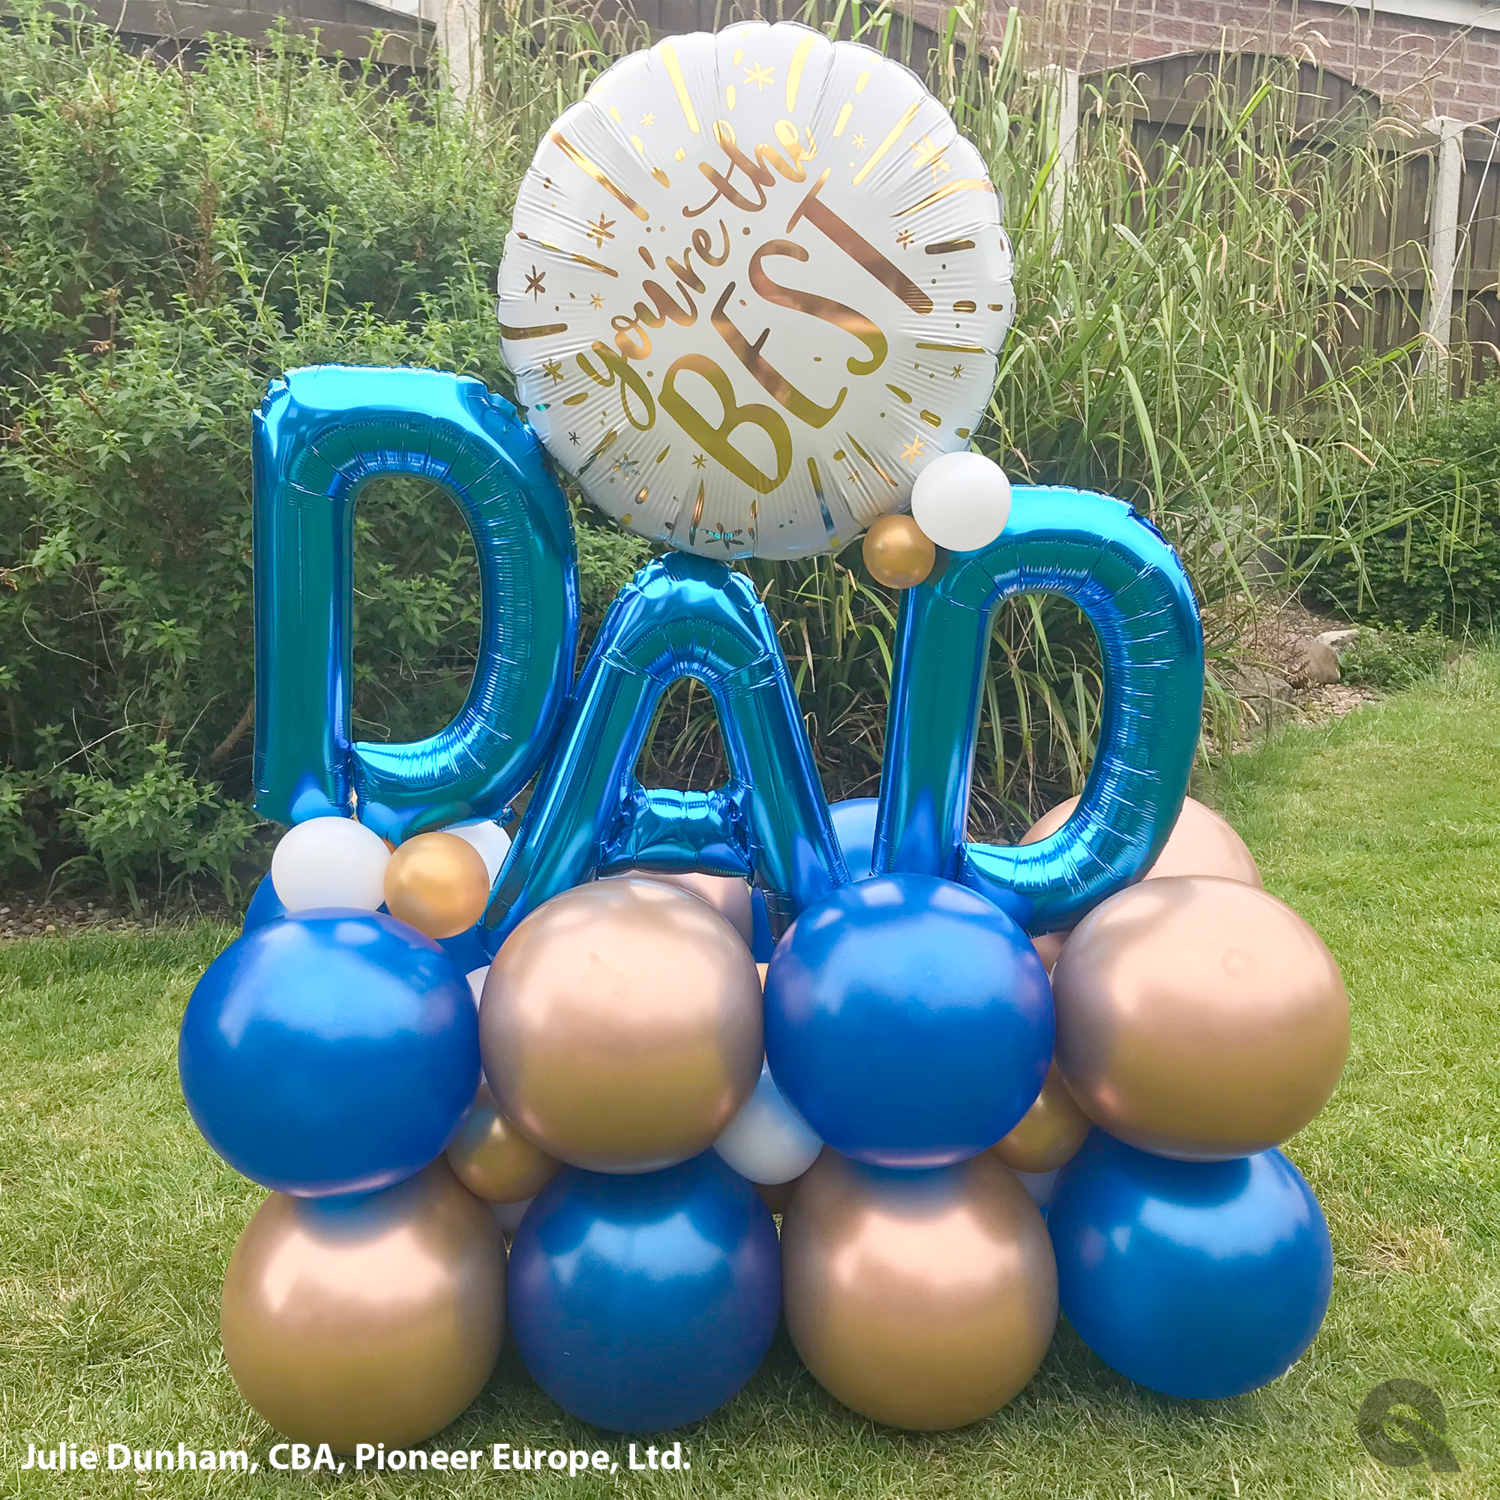 DAD jumbo marquee of balloons for father's day